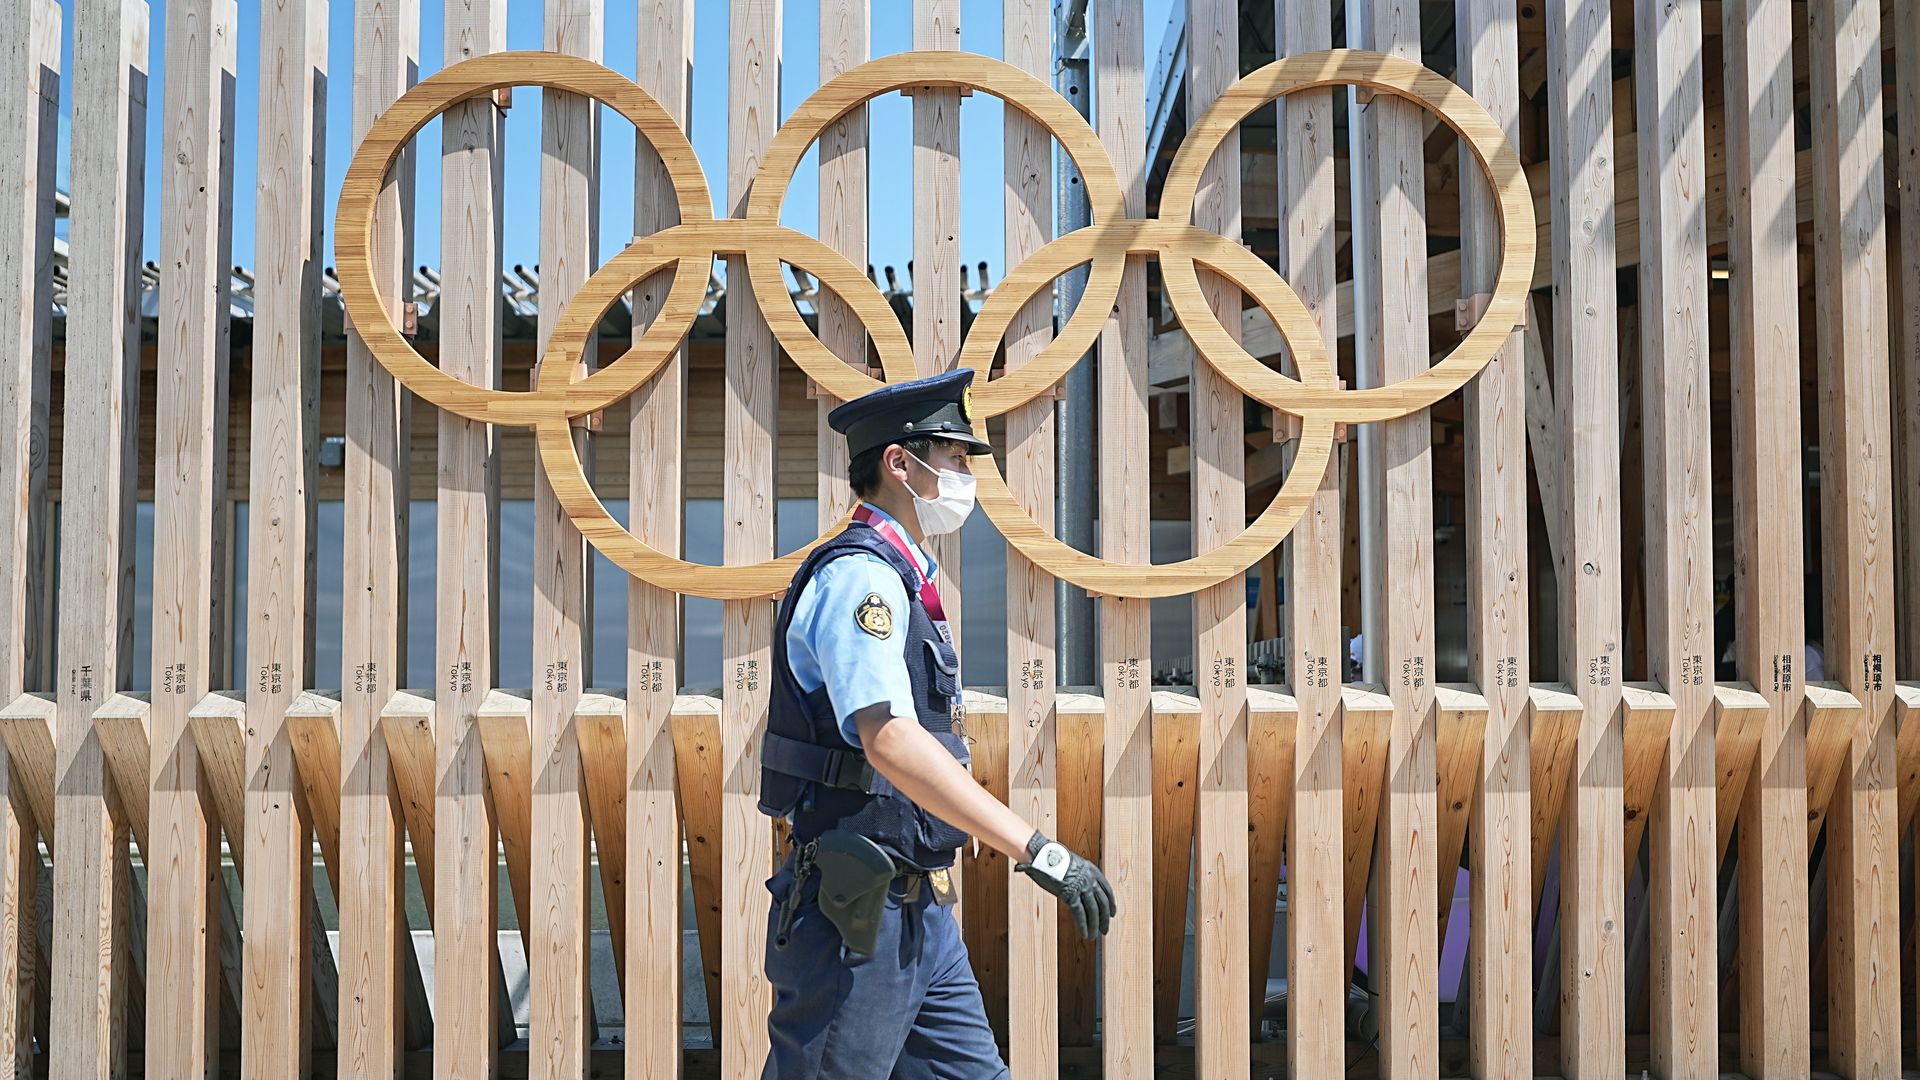  A police officer walks past Olympic rings at the entrance to Olympic Village in Tokyo, Japan, on Monday.